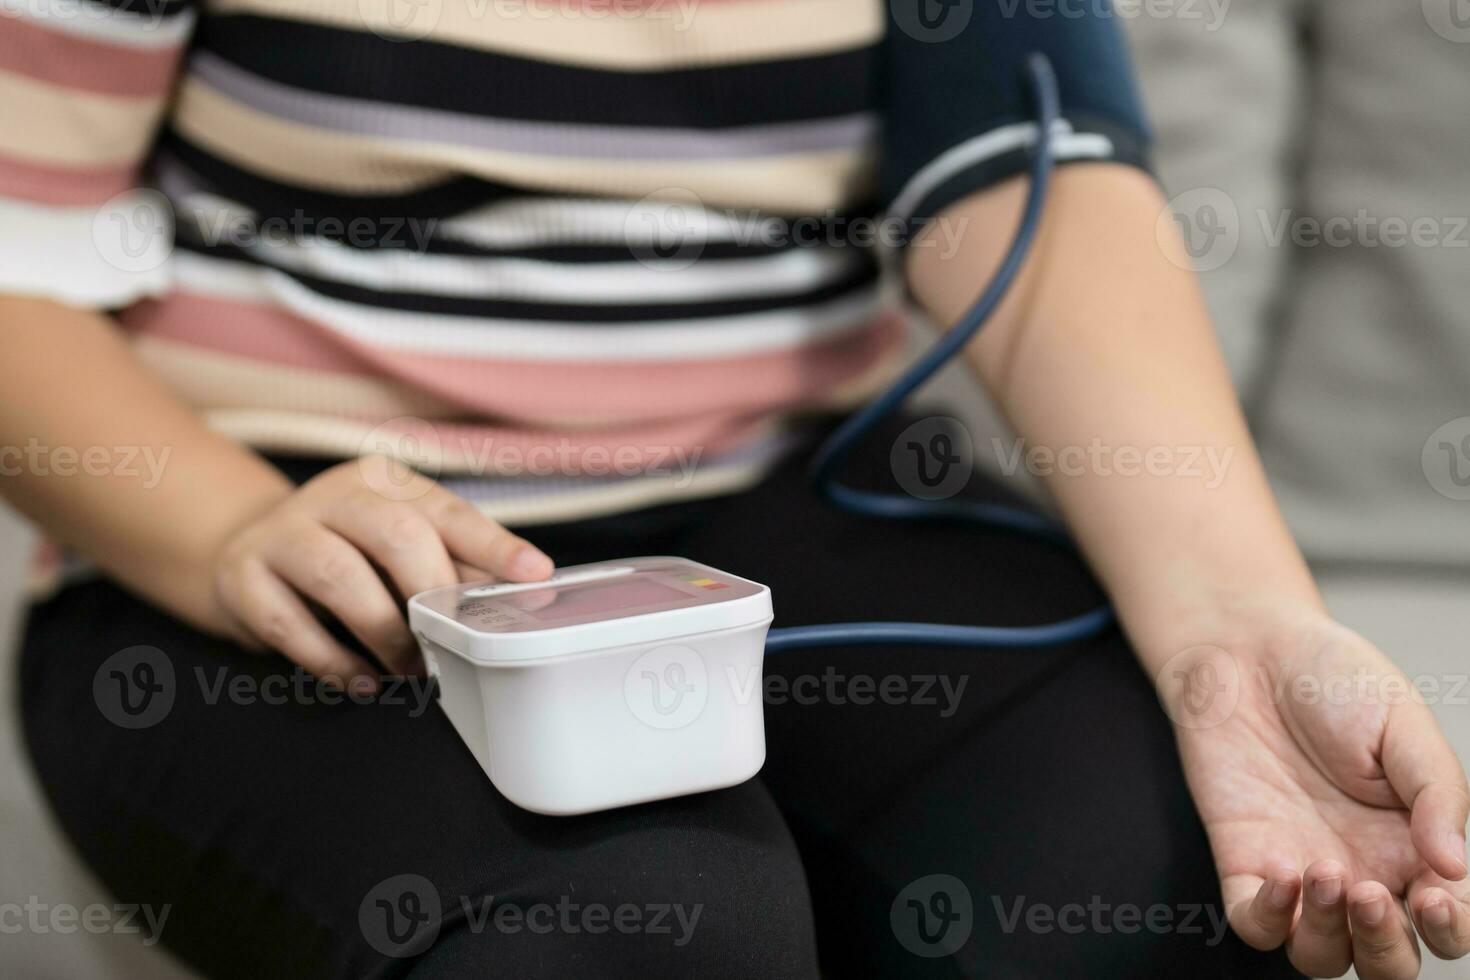 https://static.vecteezy.com/system/resources/previews/029/773/512/non_2x/woman-overweight-plus-size-self-checks-measuring-blood-pressure-and-heart-rate-tonometer-self-checkup-at-home-photo.jpg